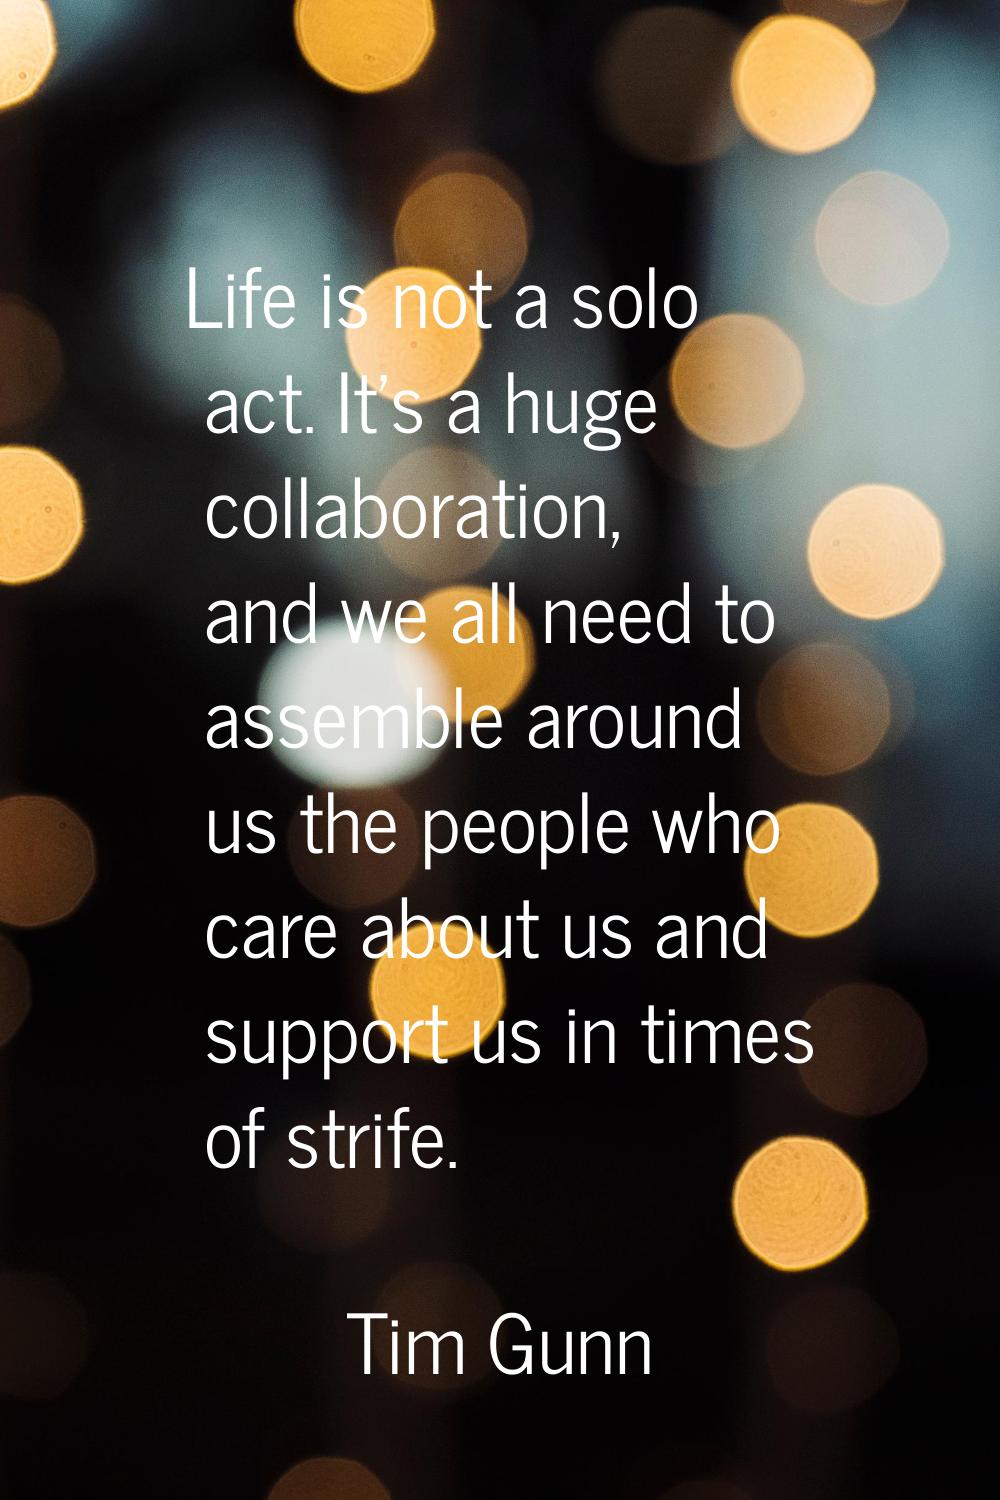 Life is not a solo act. It's a huge collaboration, and we all need to assemble around us the people